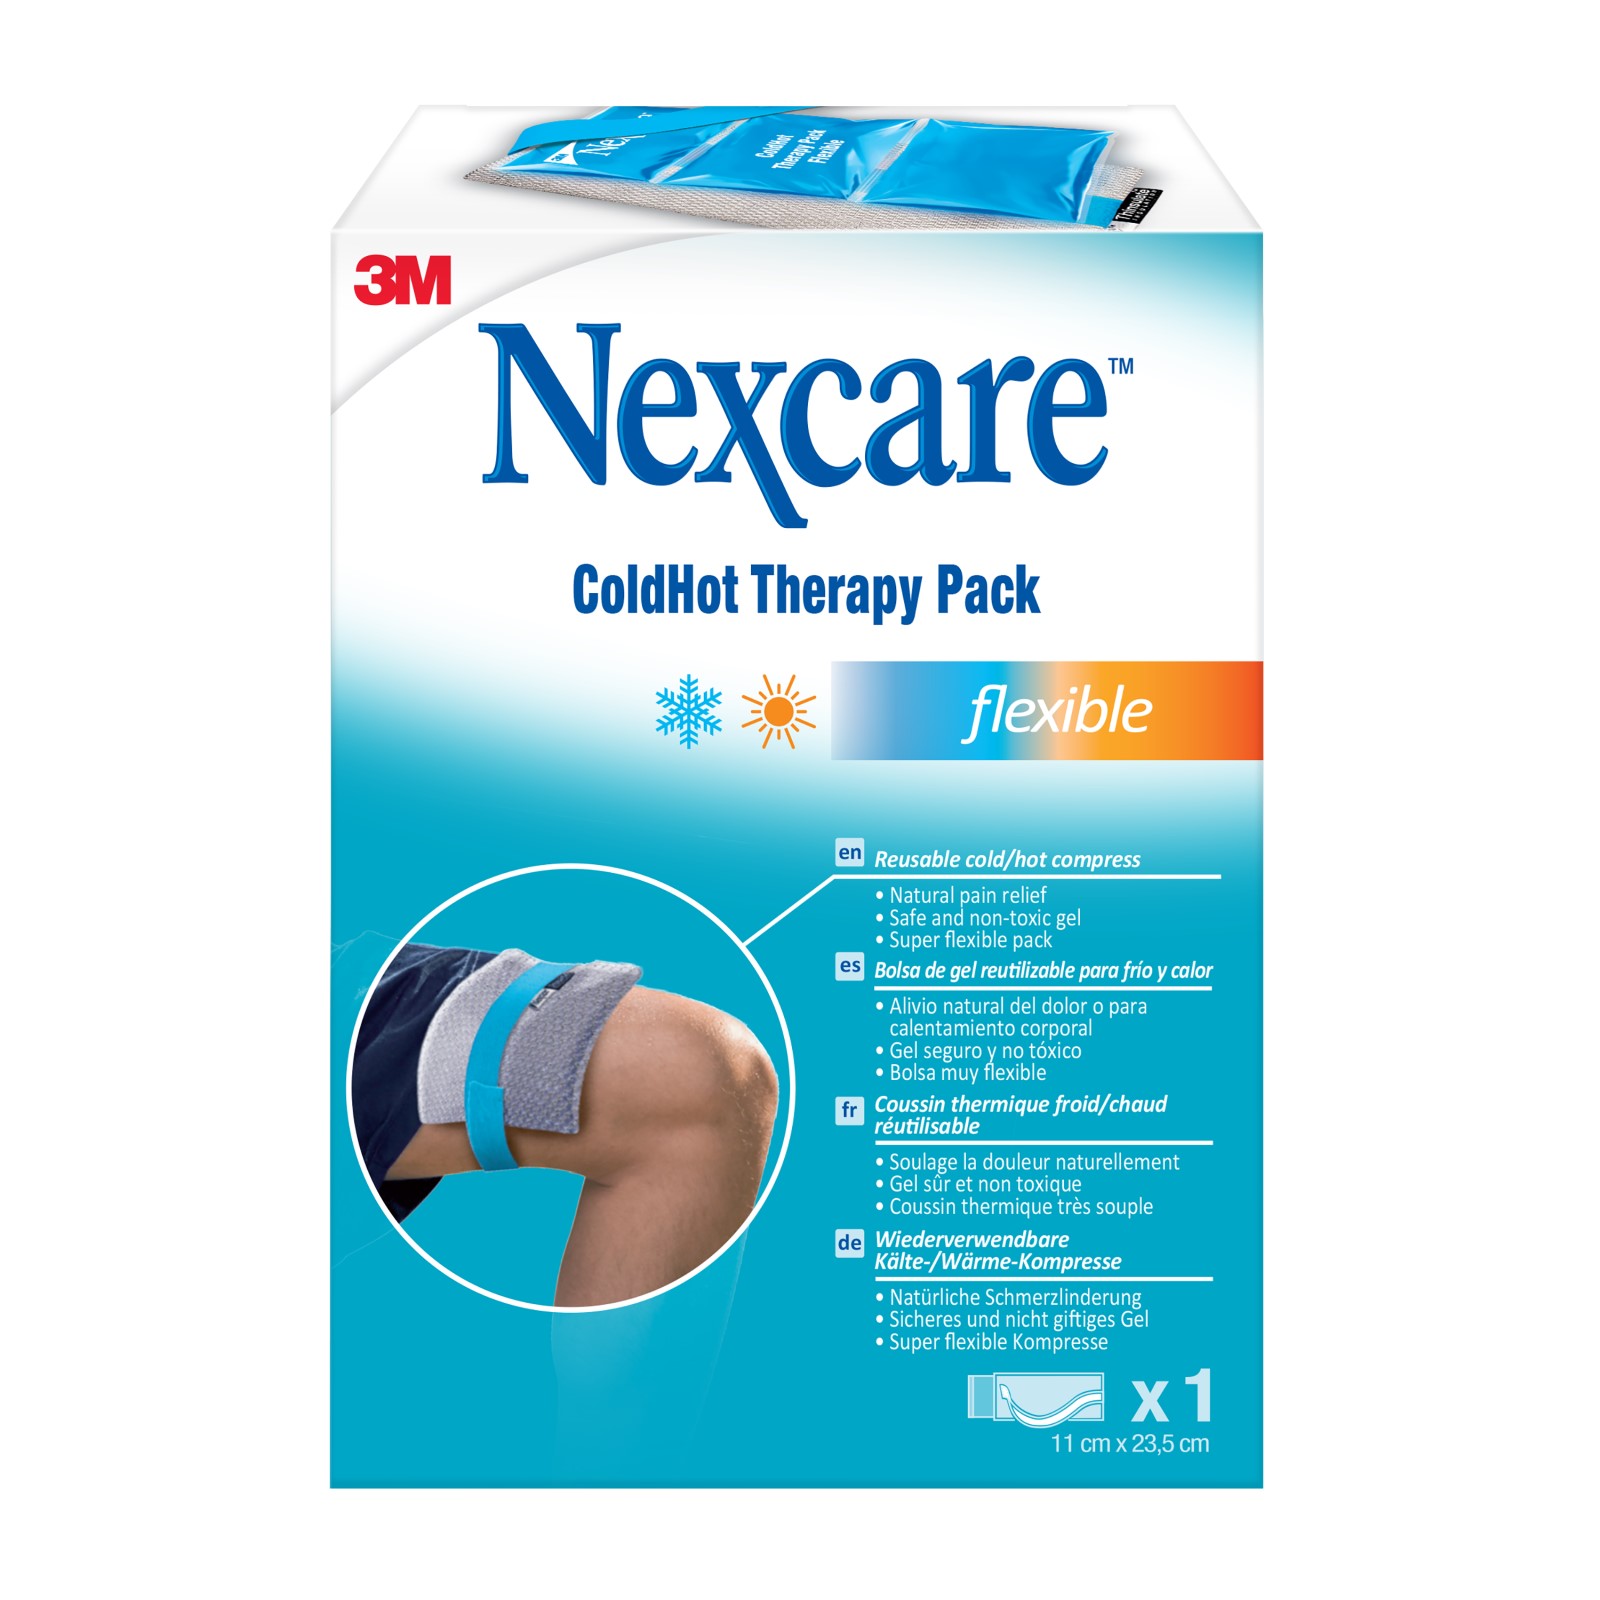 Nexcare™ ColdHot Therapy Pack Flexible Thinsulate, 23.5 cm x 11 cm